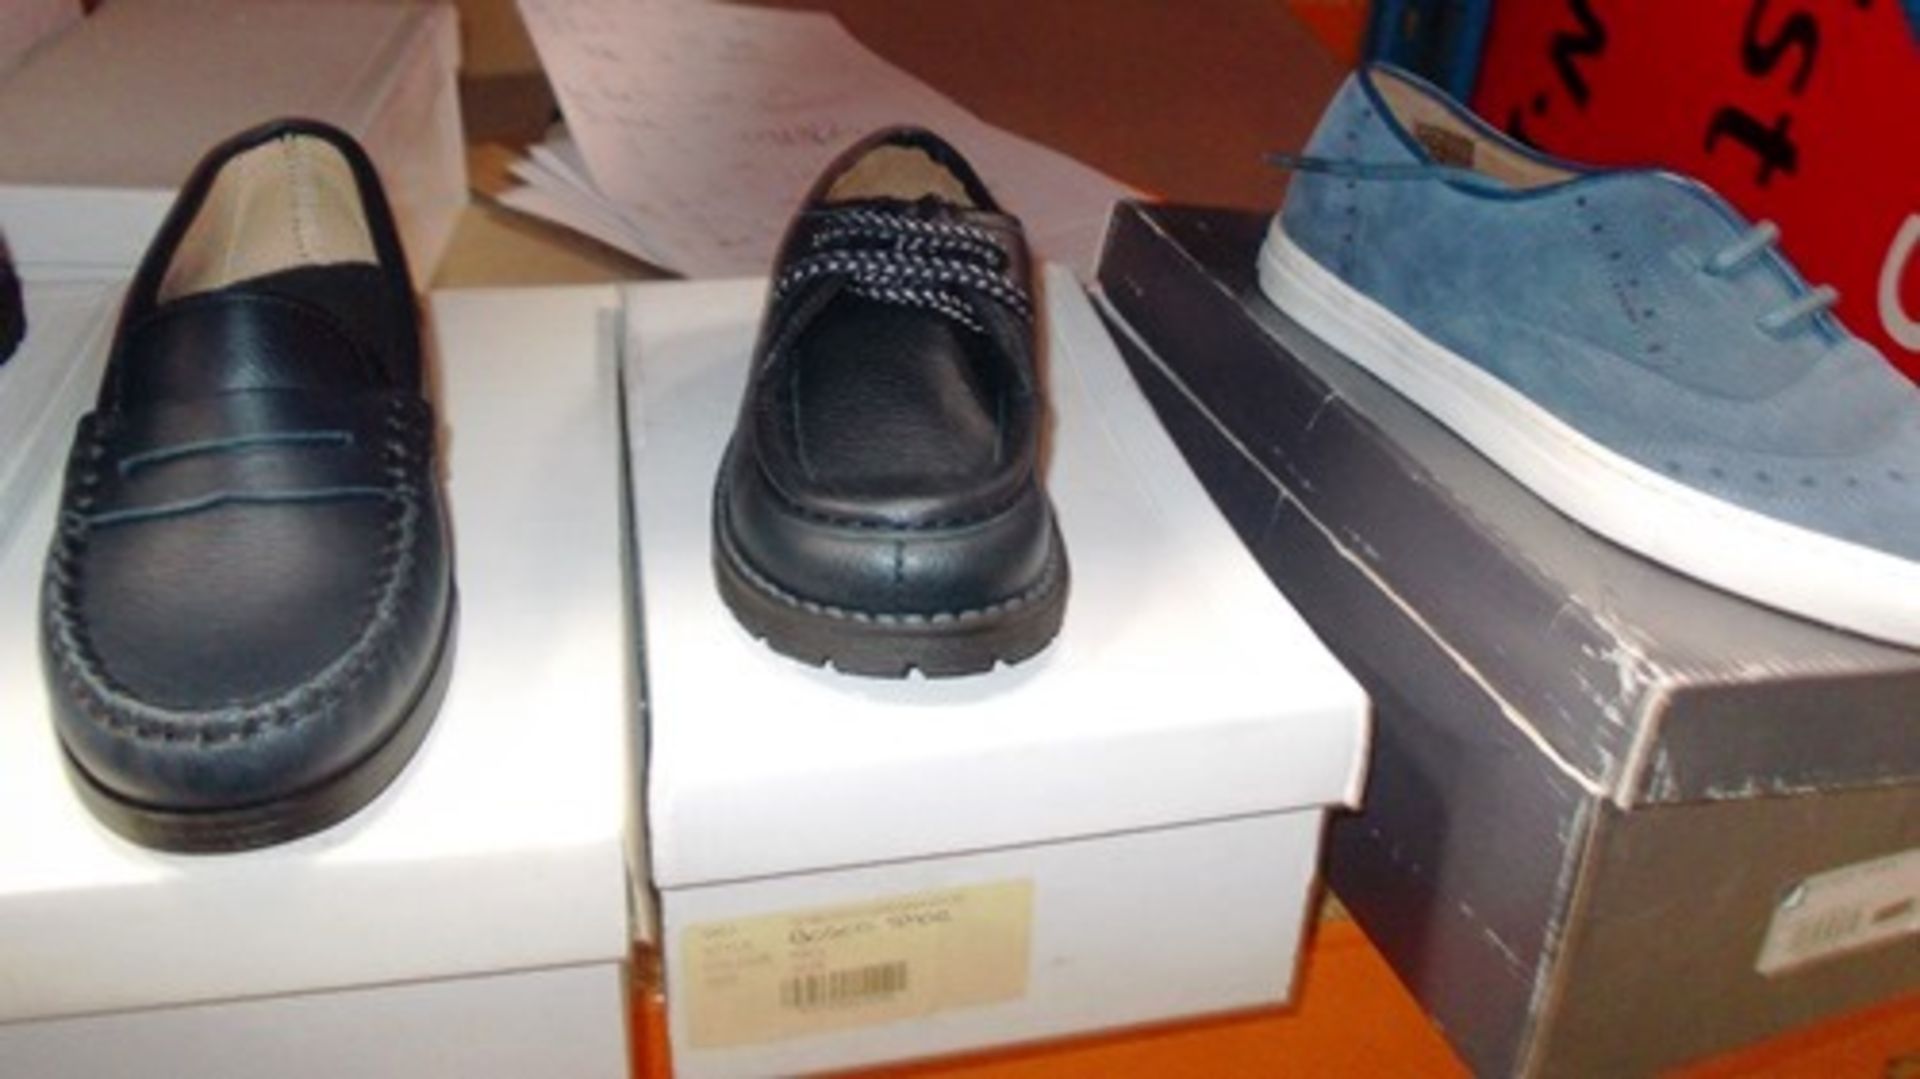 7 x pairs of La Coqueta children's leather or suede shoes, various sizes - New in box (shoe bay) - Image 2 of 2